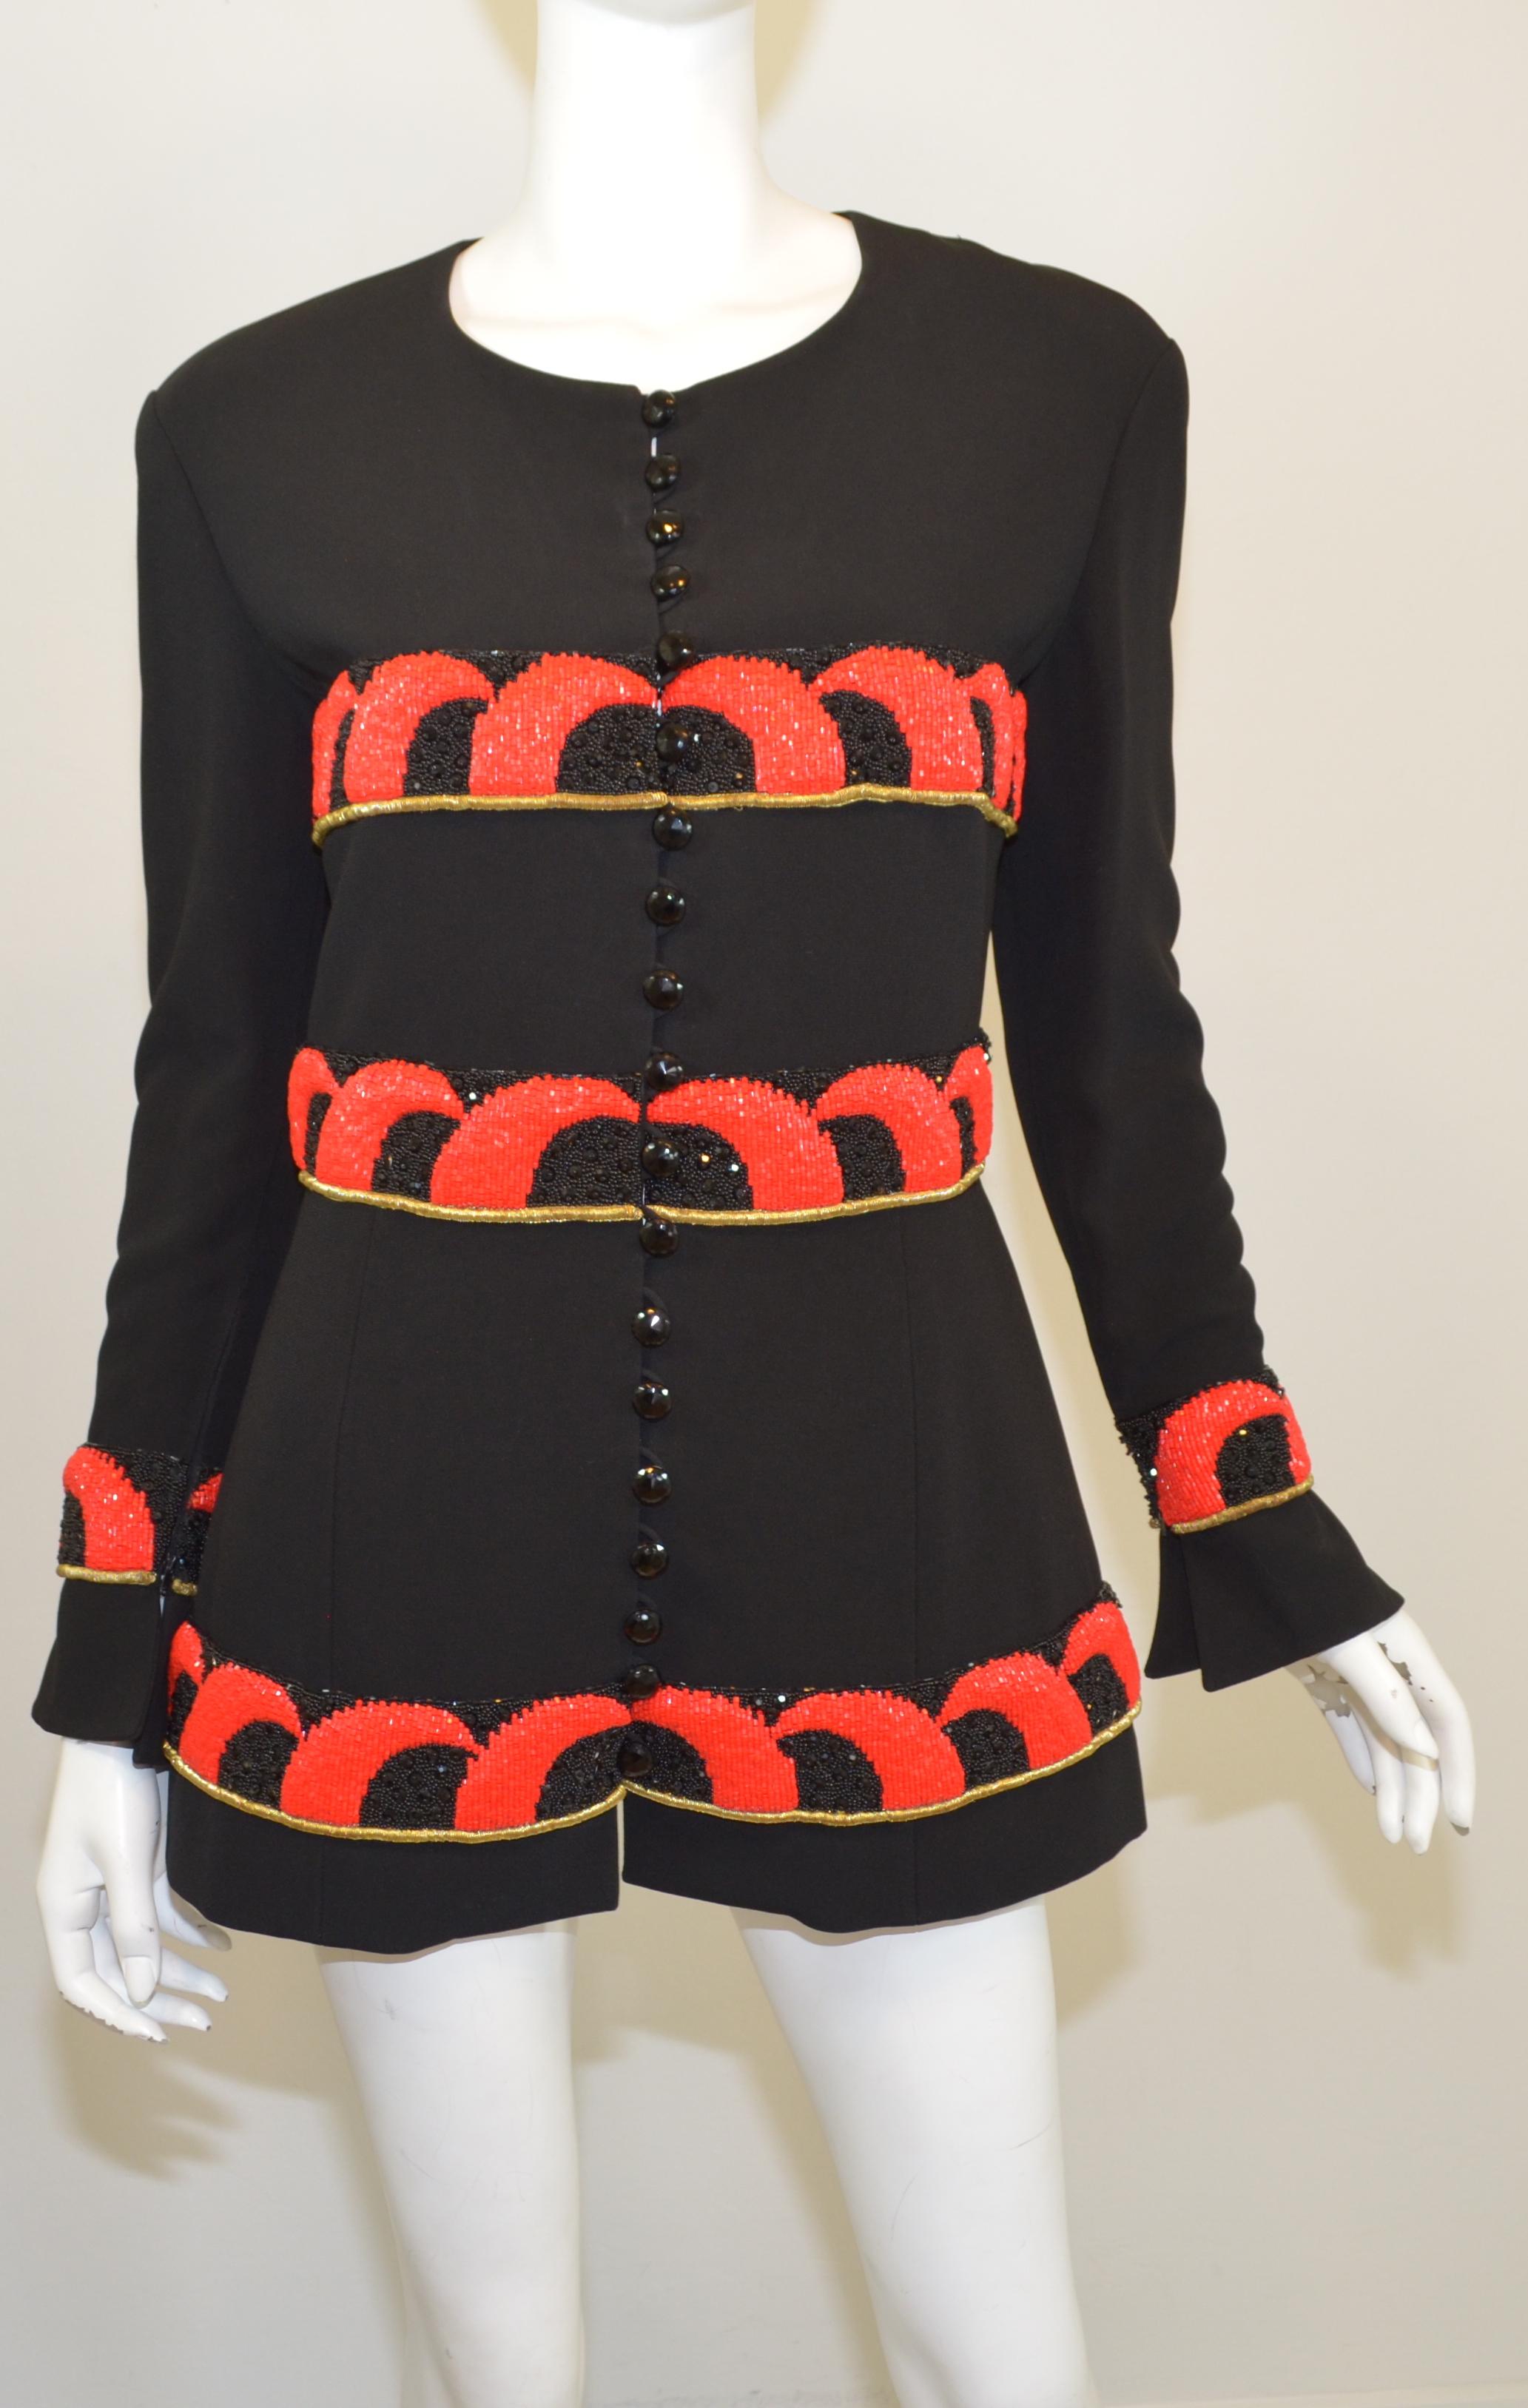 Karl Lagerfeld jacket featured in a black crepe-wool fabric with red, black, and gold bead embellishing, button fastenings, and zippers along the cuffs of the sleeves. Jacket is fully lined. Made in France.

Measurements:
bust 37'', sleeves 23'',